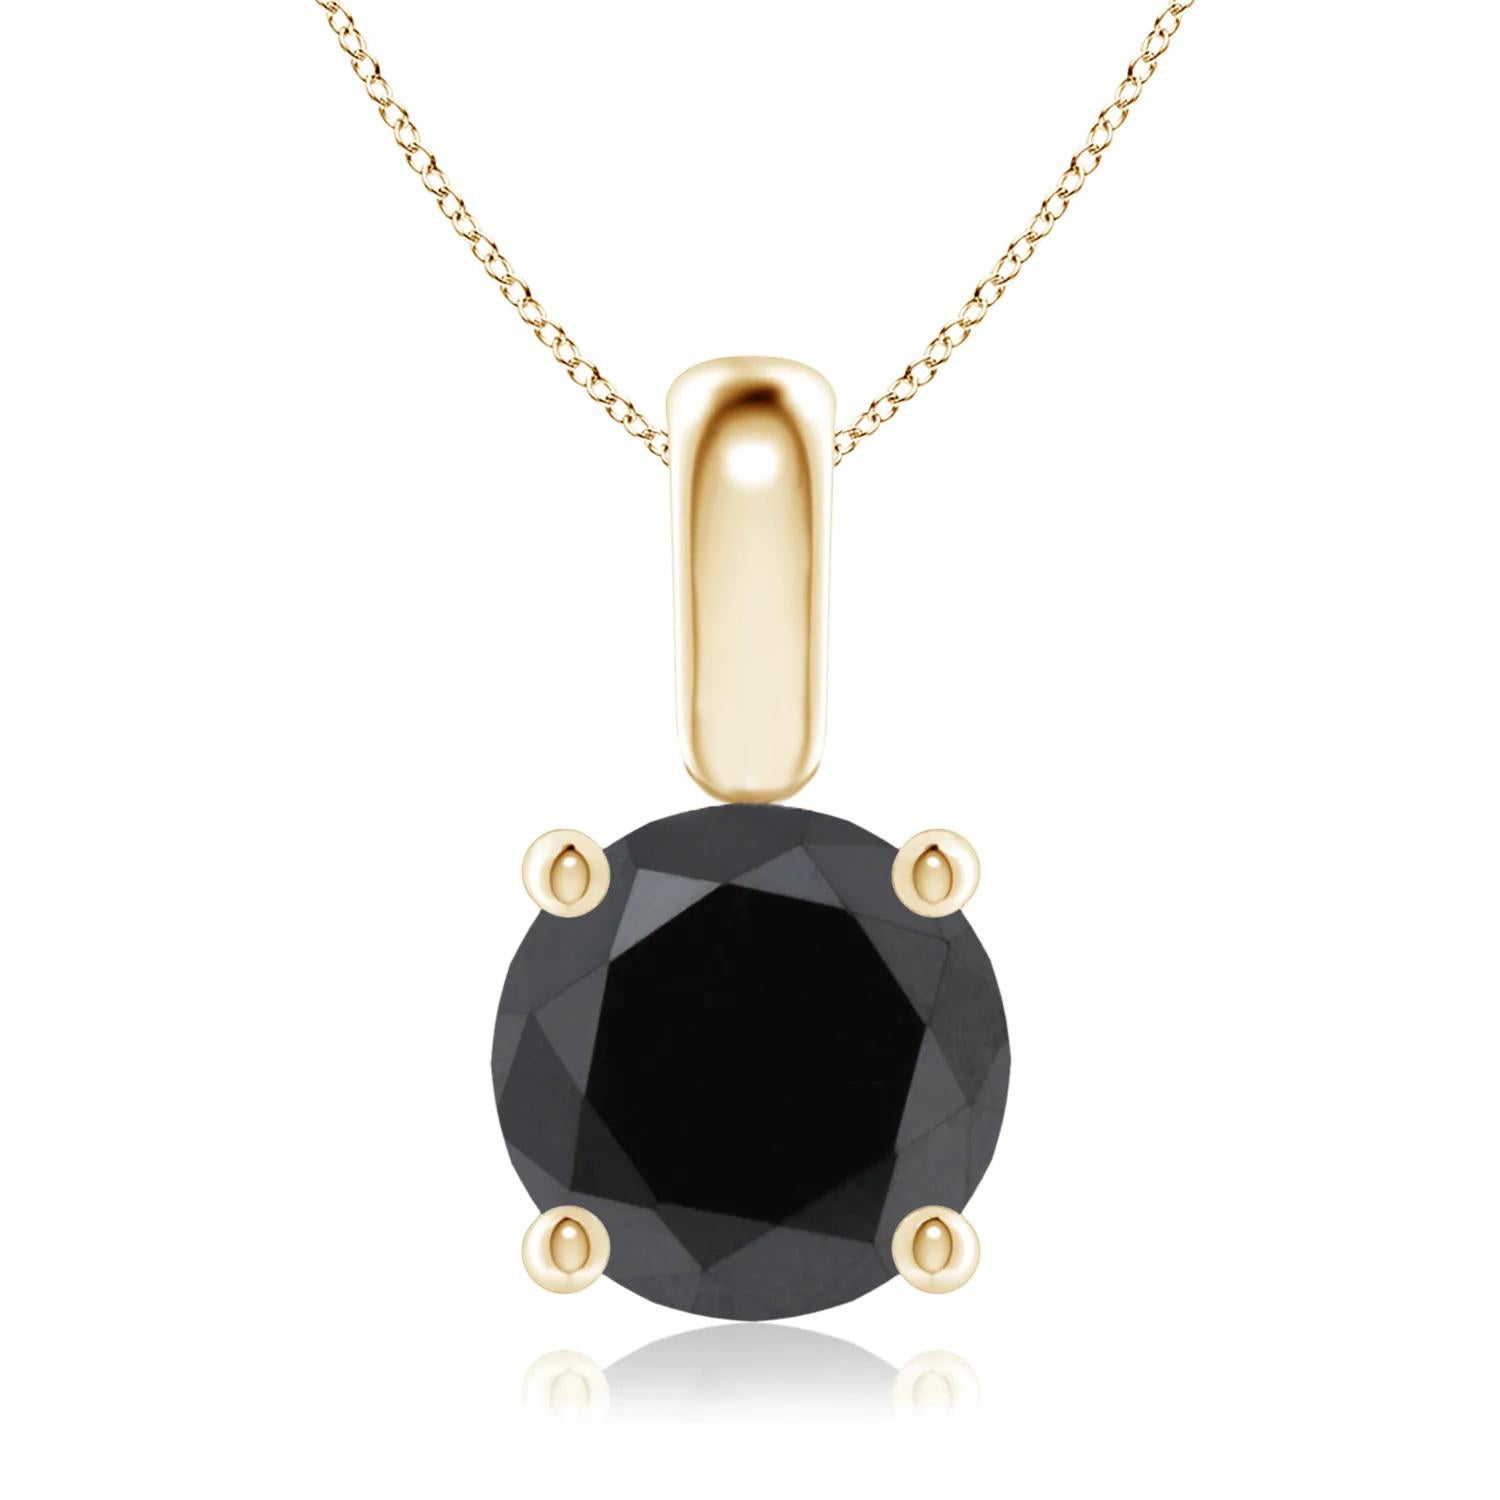 Contemporary 1.29 Carat Round Black Diamond Solitaire Pendant Necklace in 14K Yellow Gold